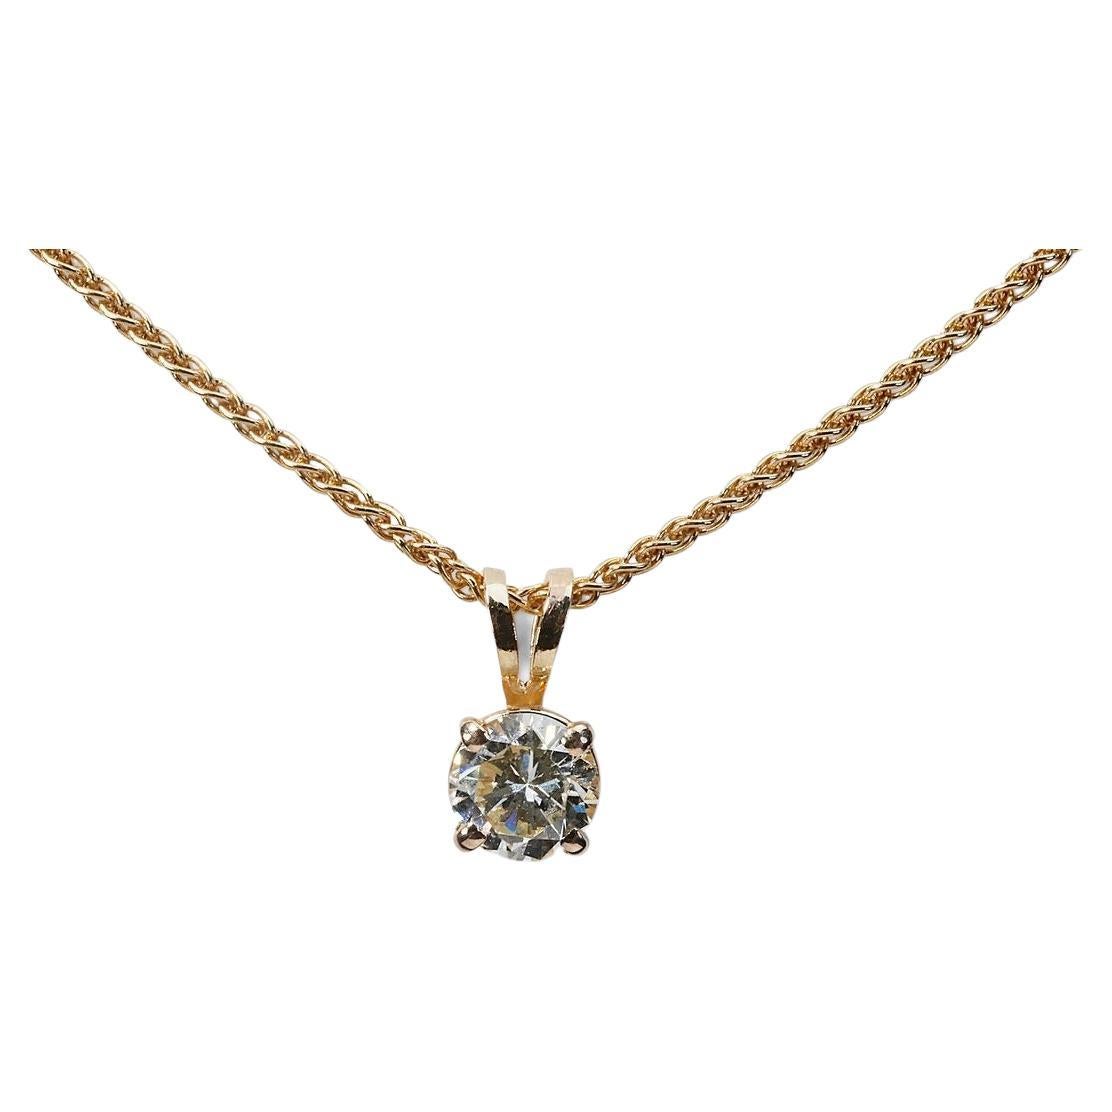 Sparkling 18k Yellow Gold Necklace & Pendant with 1ct Natural Diamond GIA Cert